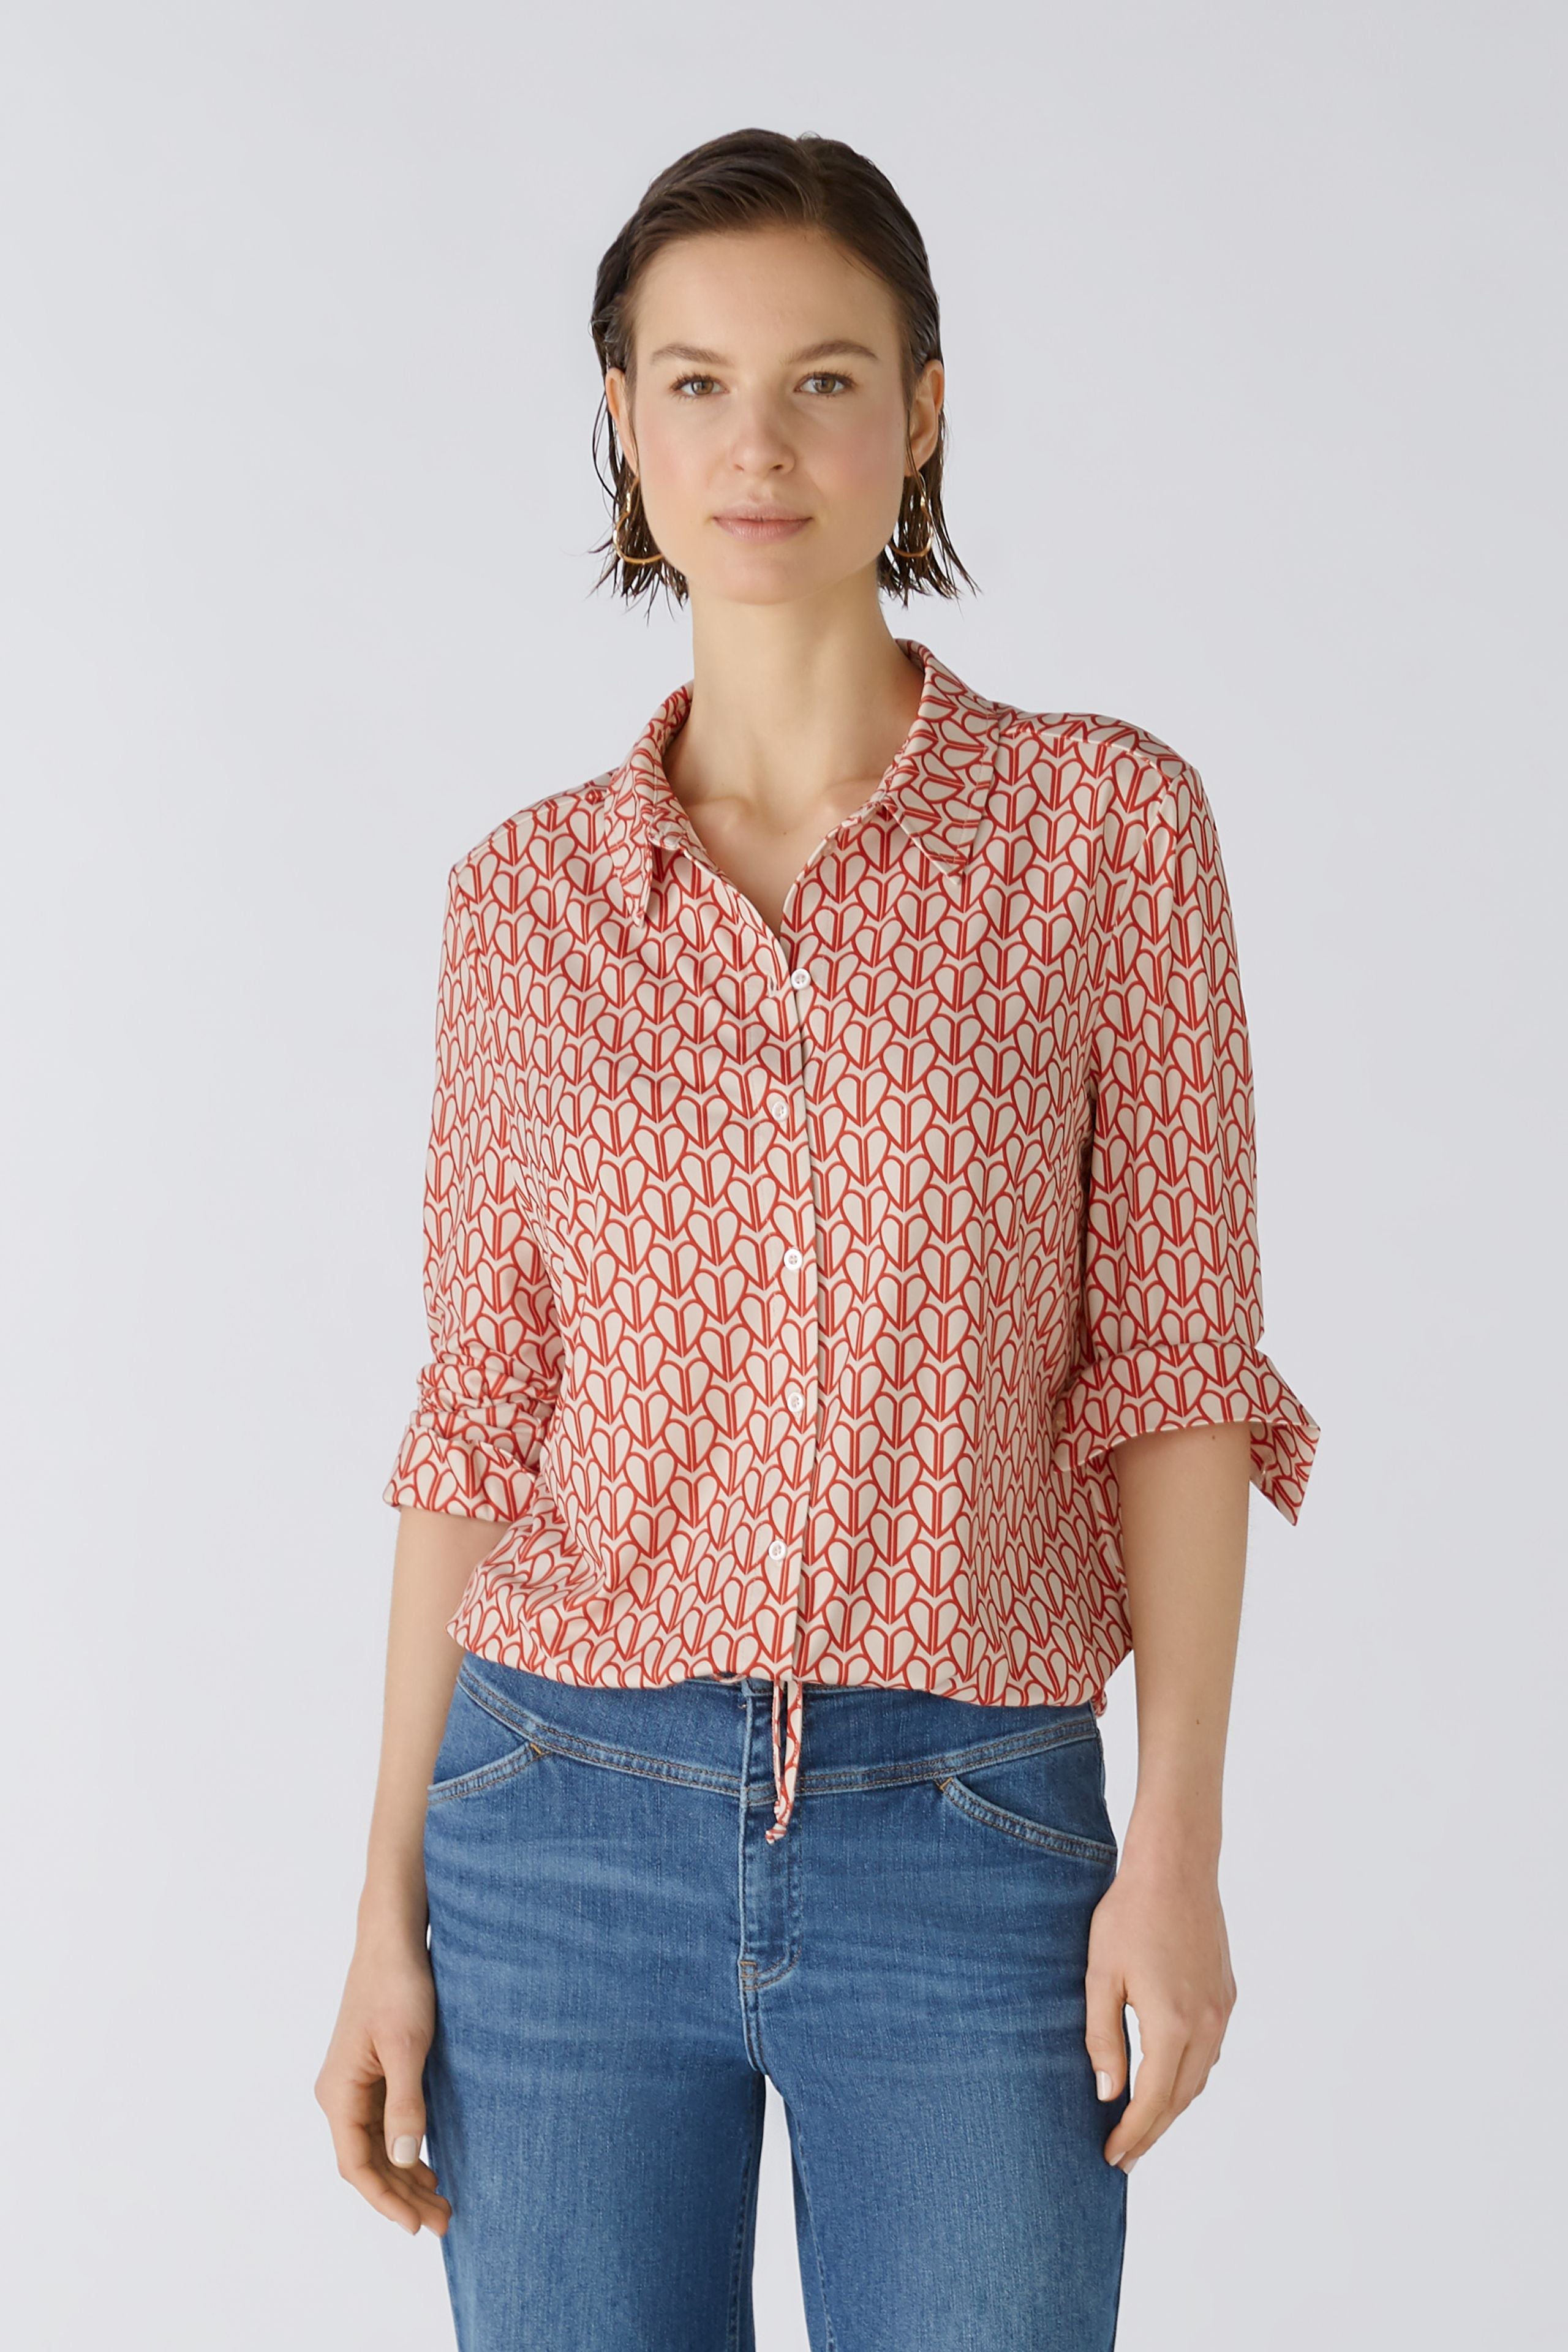 Heart Print Blouse with Pull String Hem in Red/White